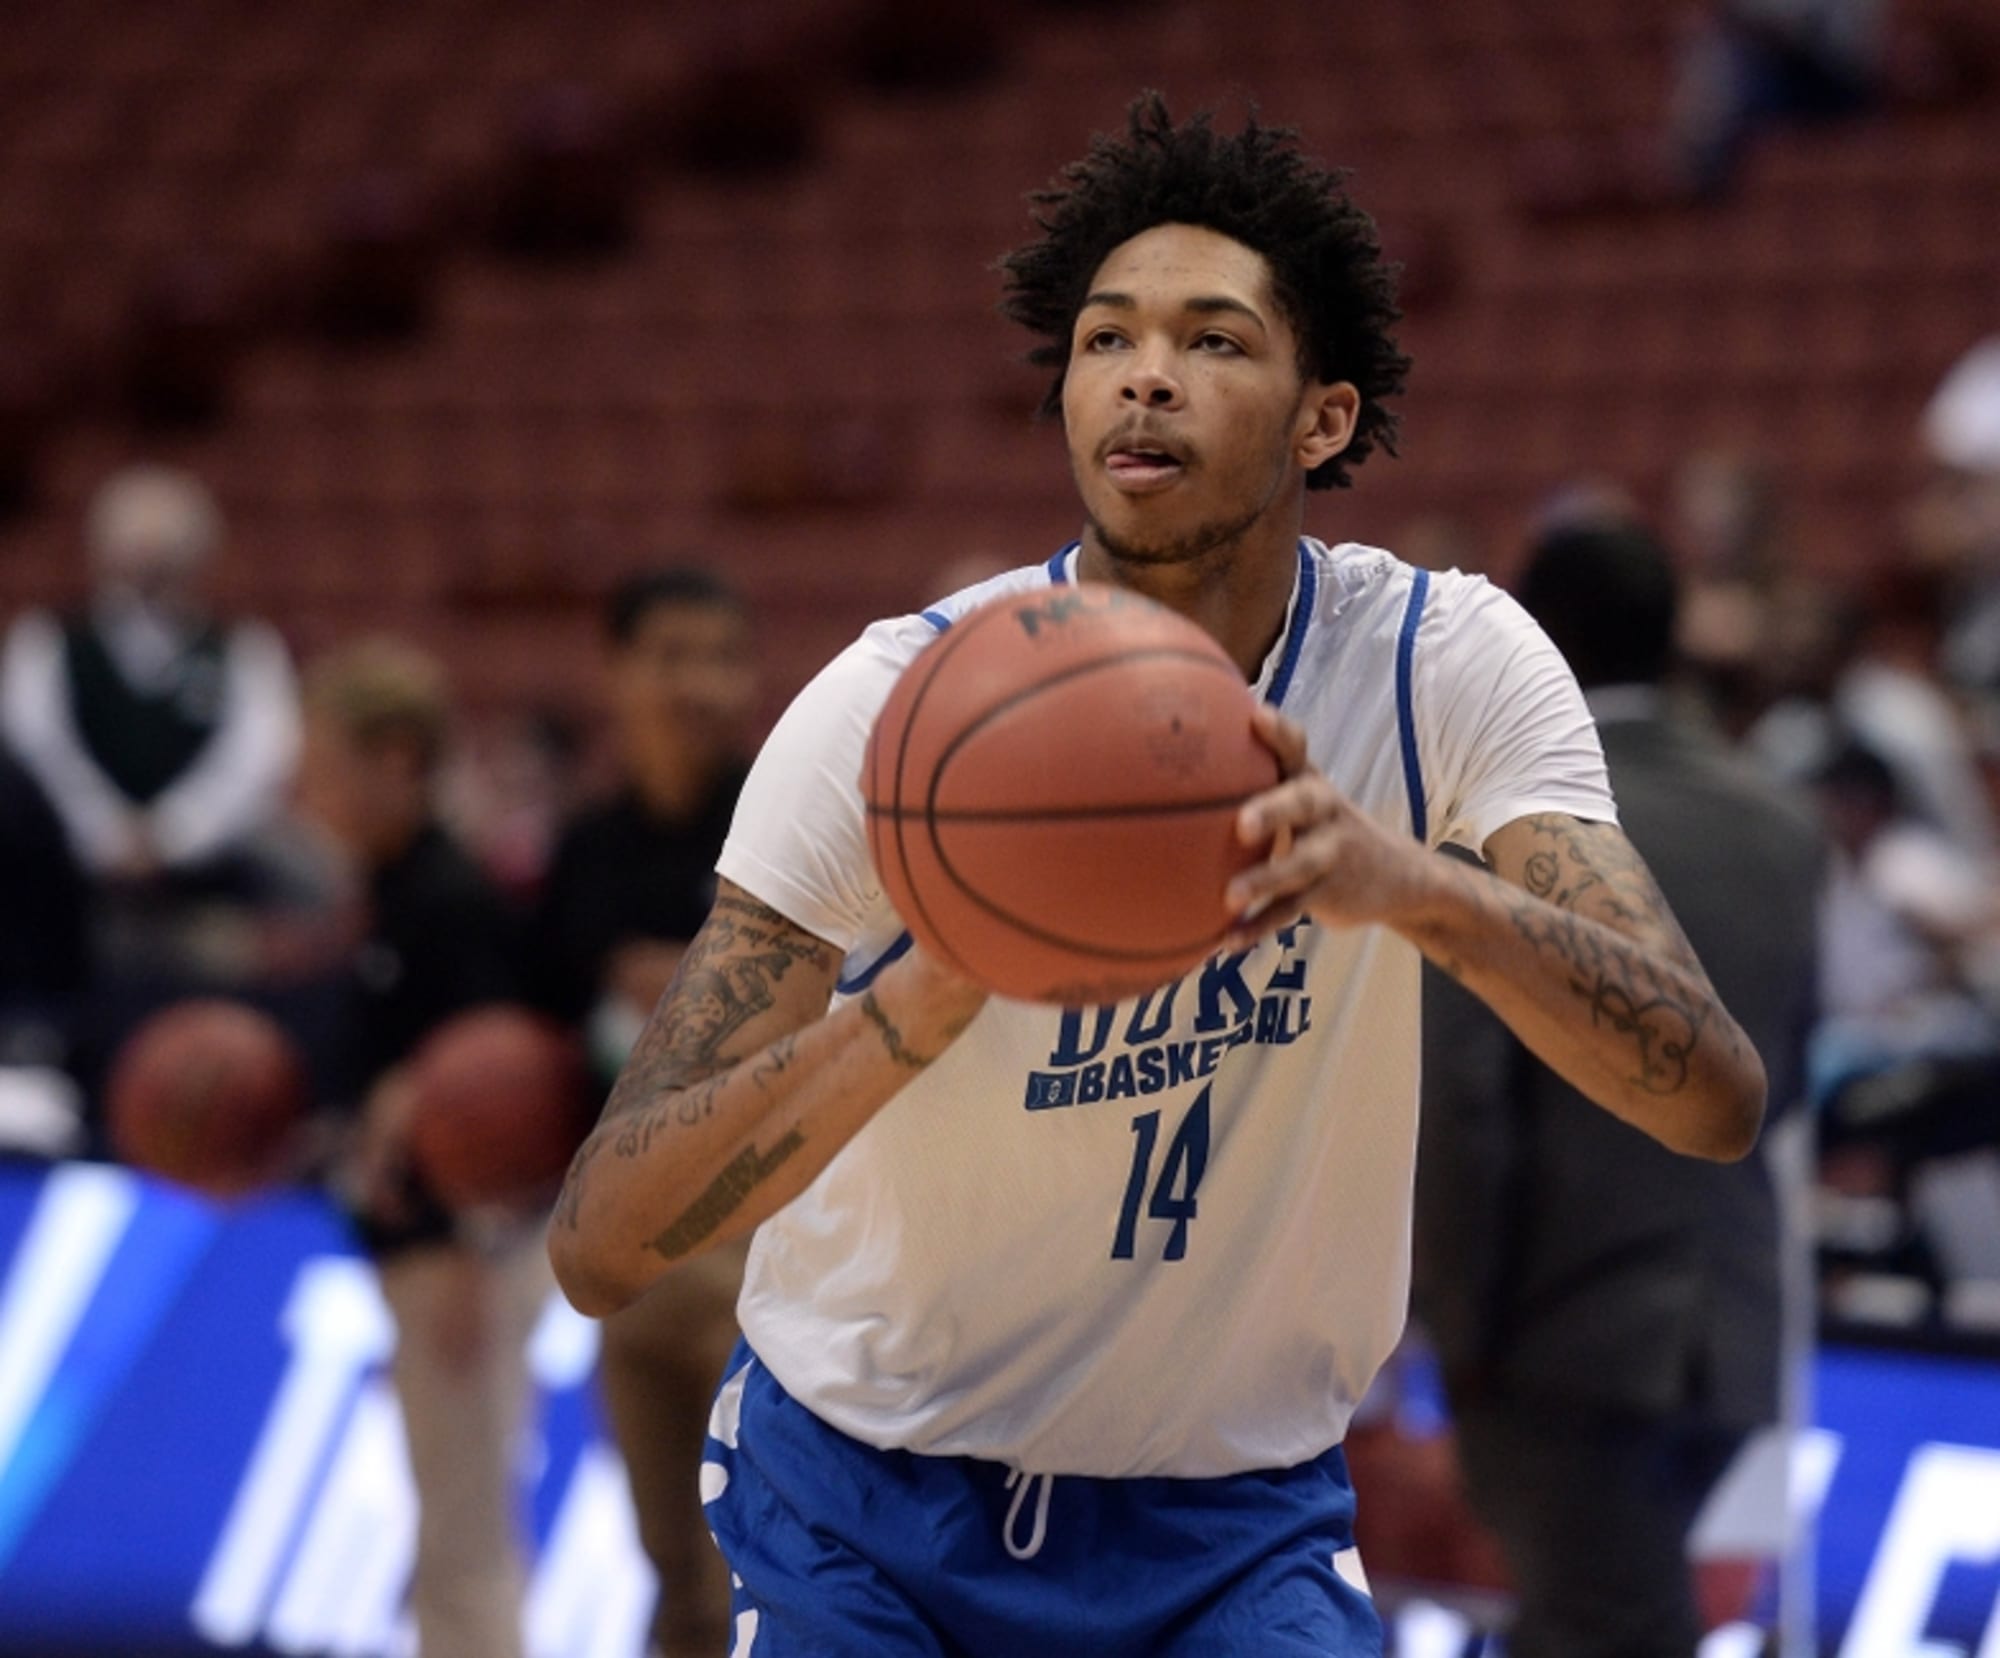 Los Angeles Lakers: Does Brandon Ingram fit on the team?